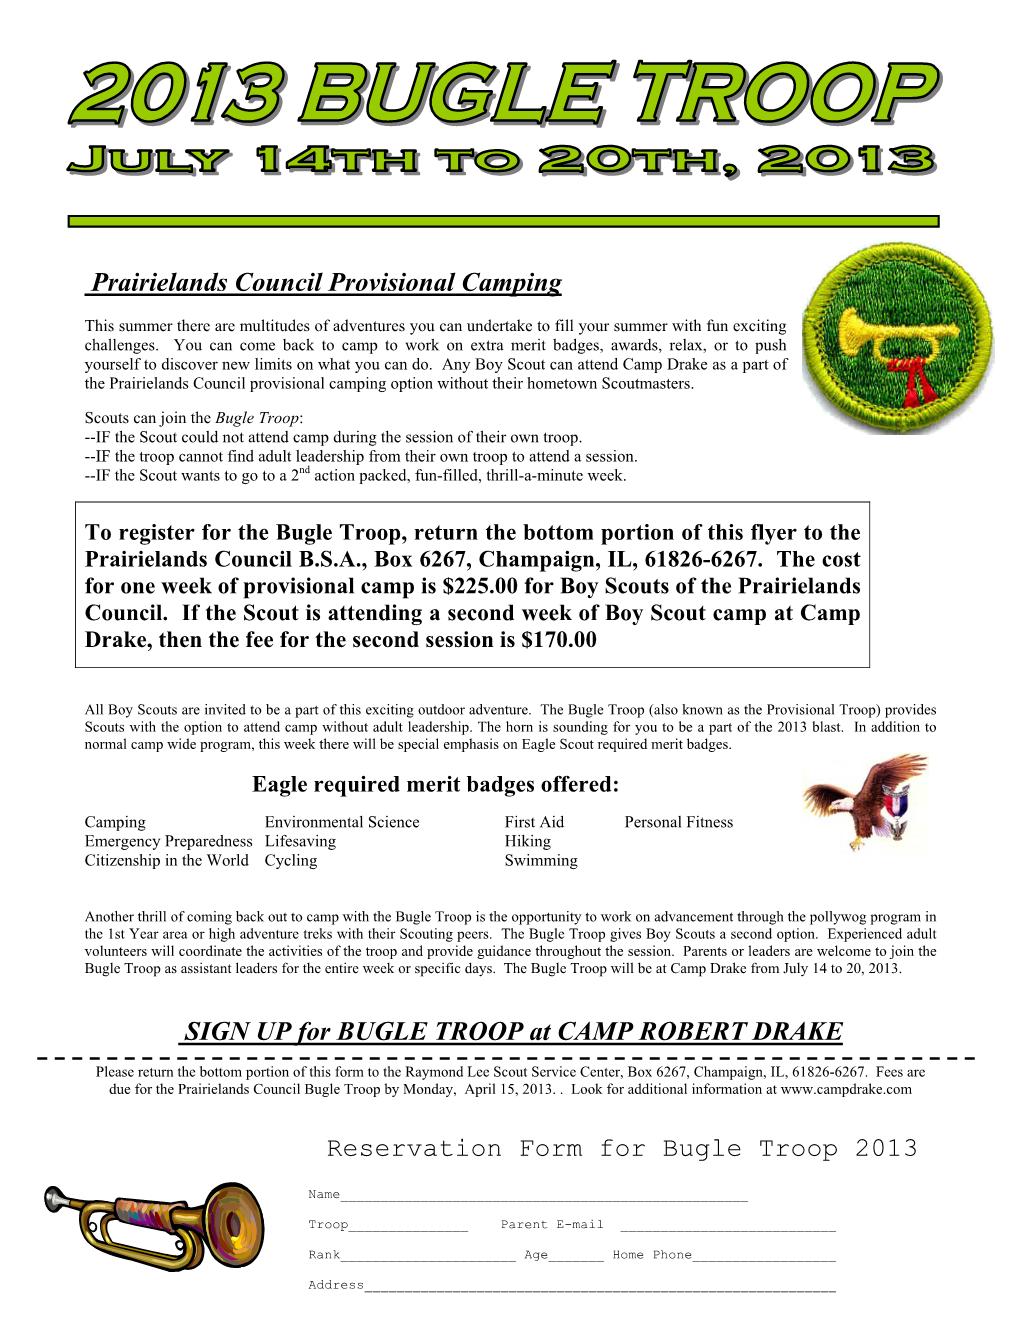 Prairielands Council Provisional Camping SIGN up for BUGLE